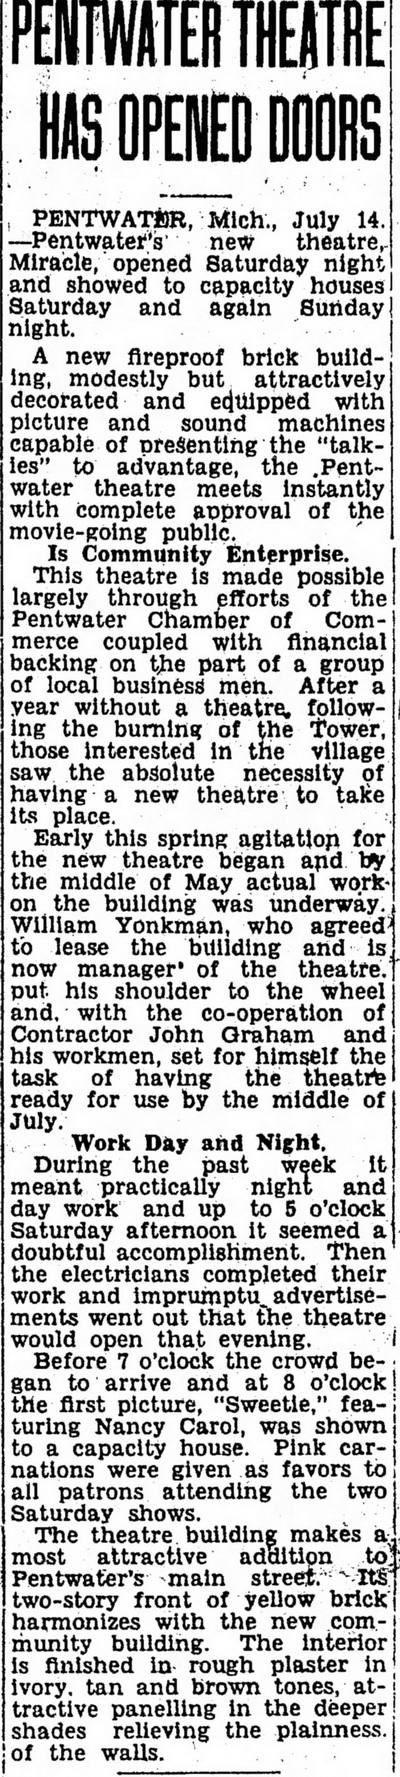 Pentwater Theatre - Jul 14 1930 Opening Article